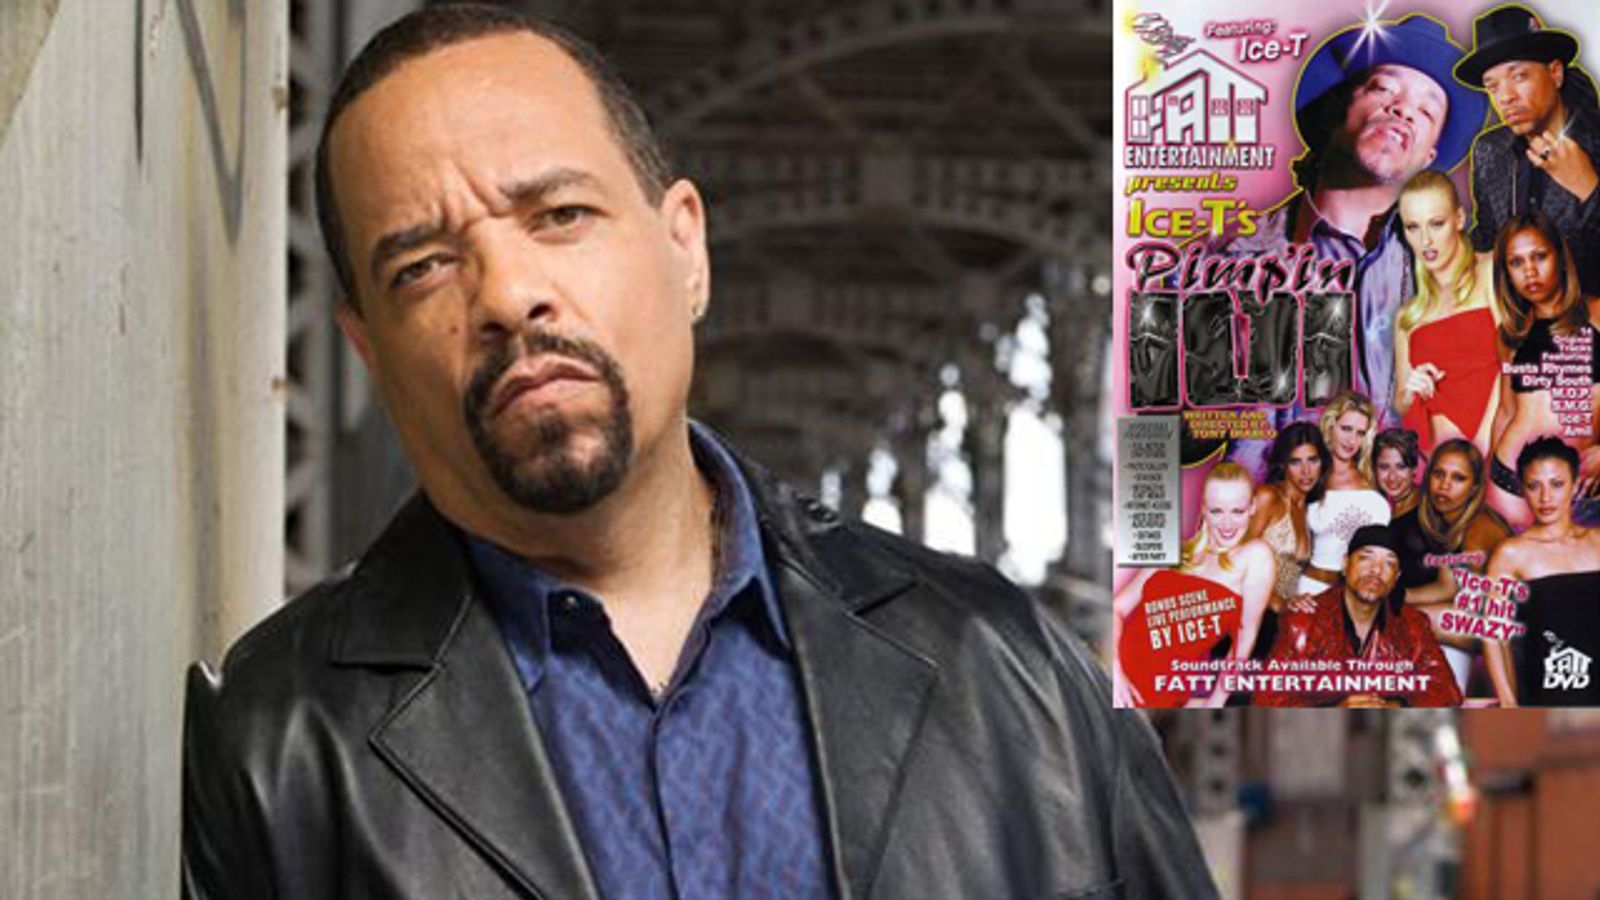 ‘Ice-T’s Pimpin’ 101’ Now Available from Evolution Distribution